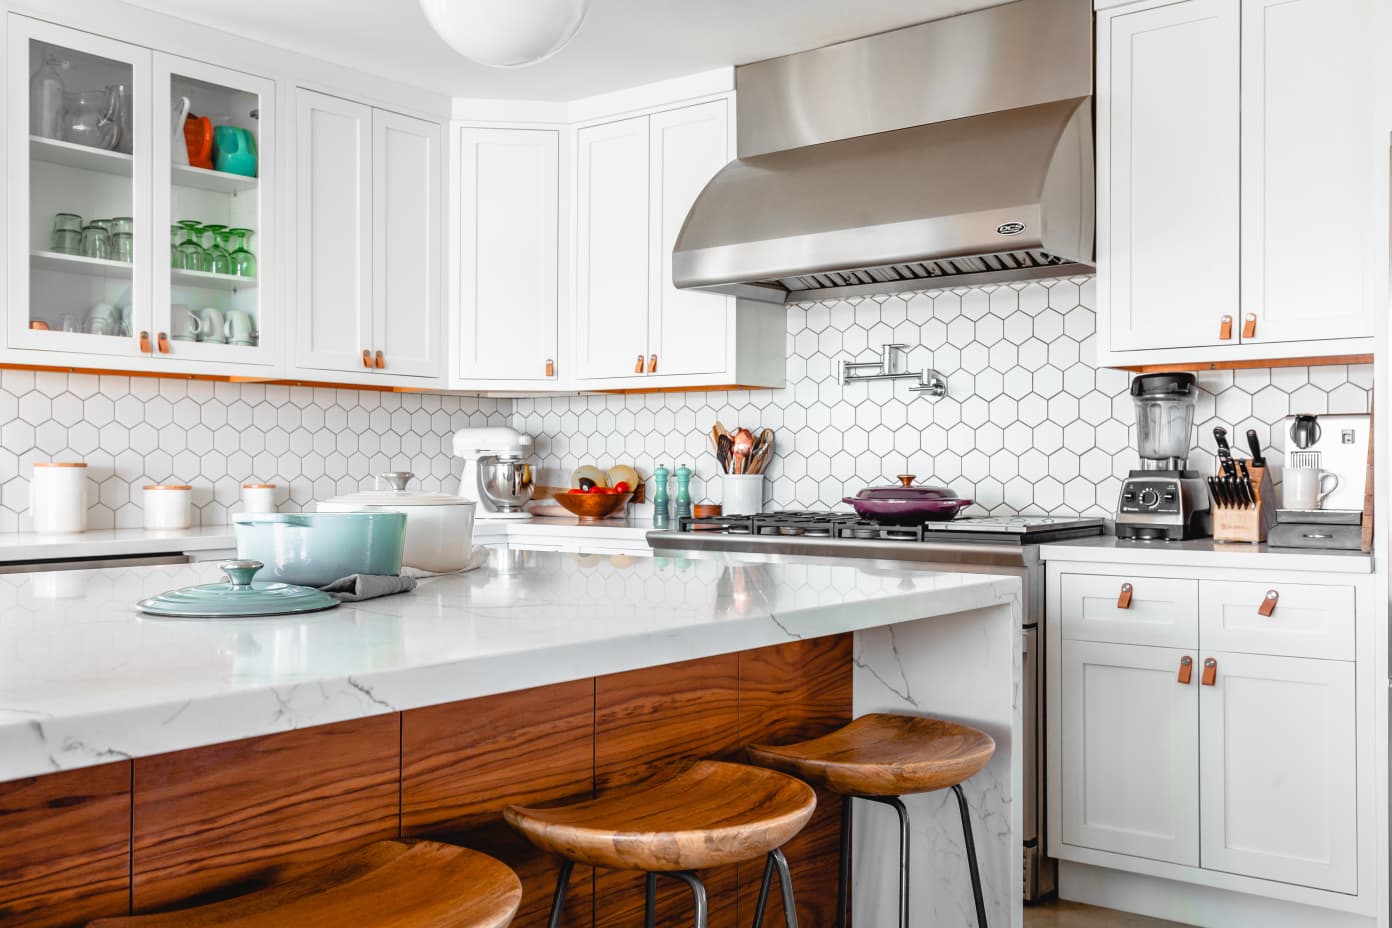 6 Things You Shouldn’t Store on Your Countertops (And 2 Things You Should)